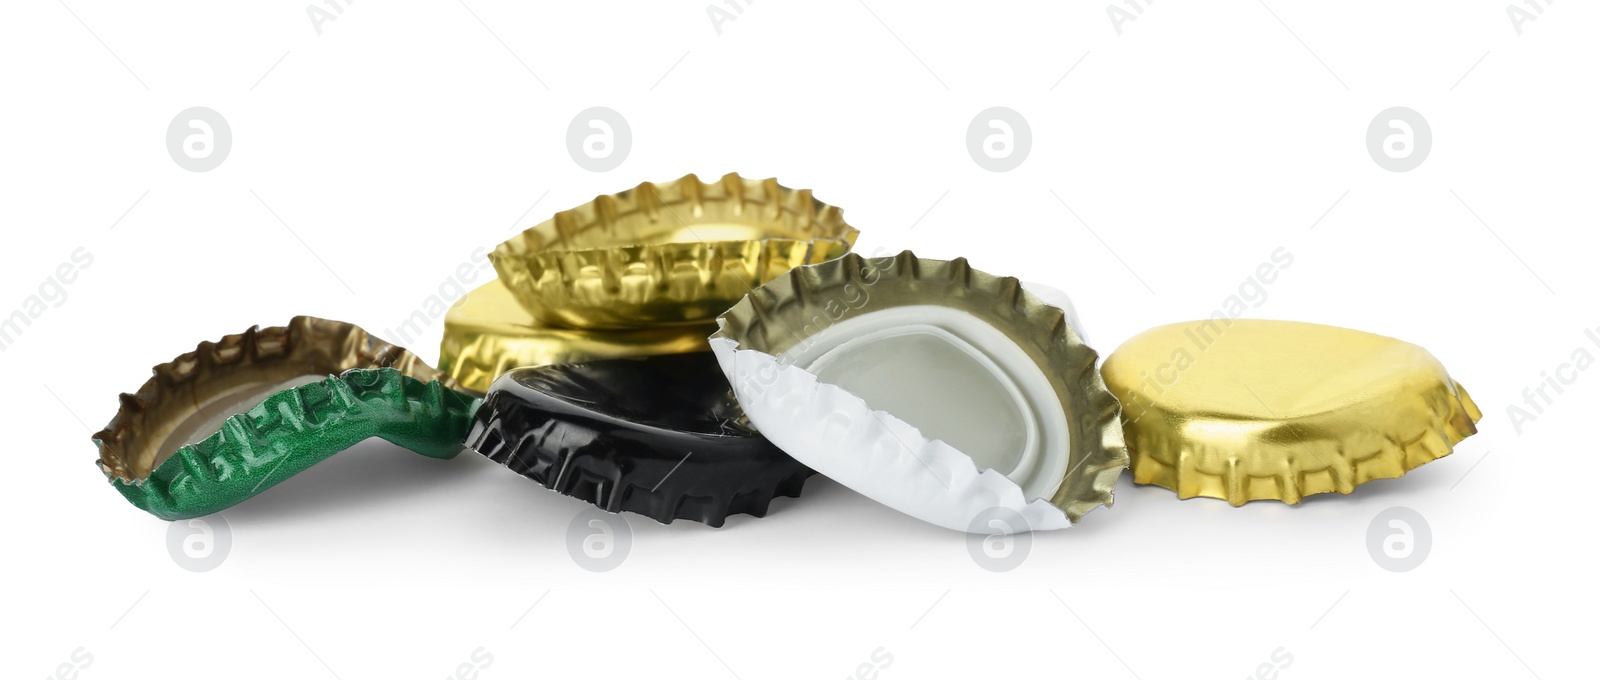 Photo of Group of different beer bottle caps isolated on white